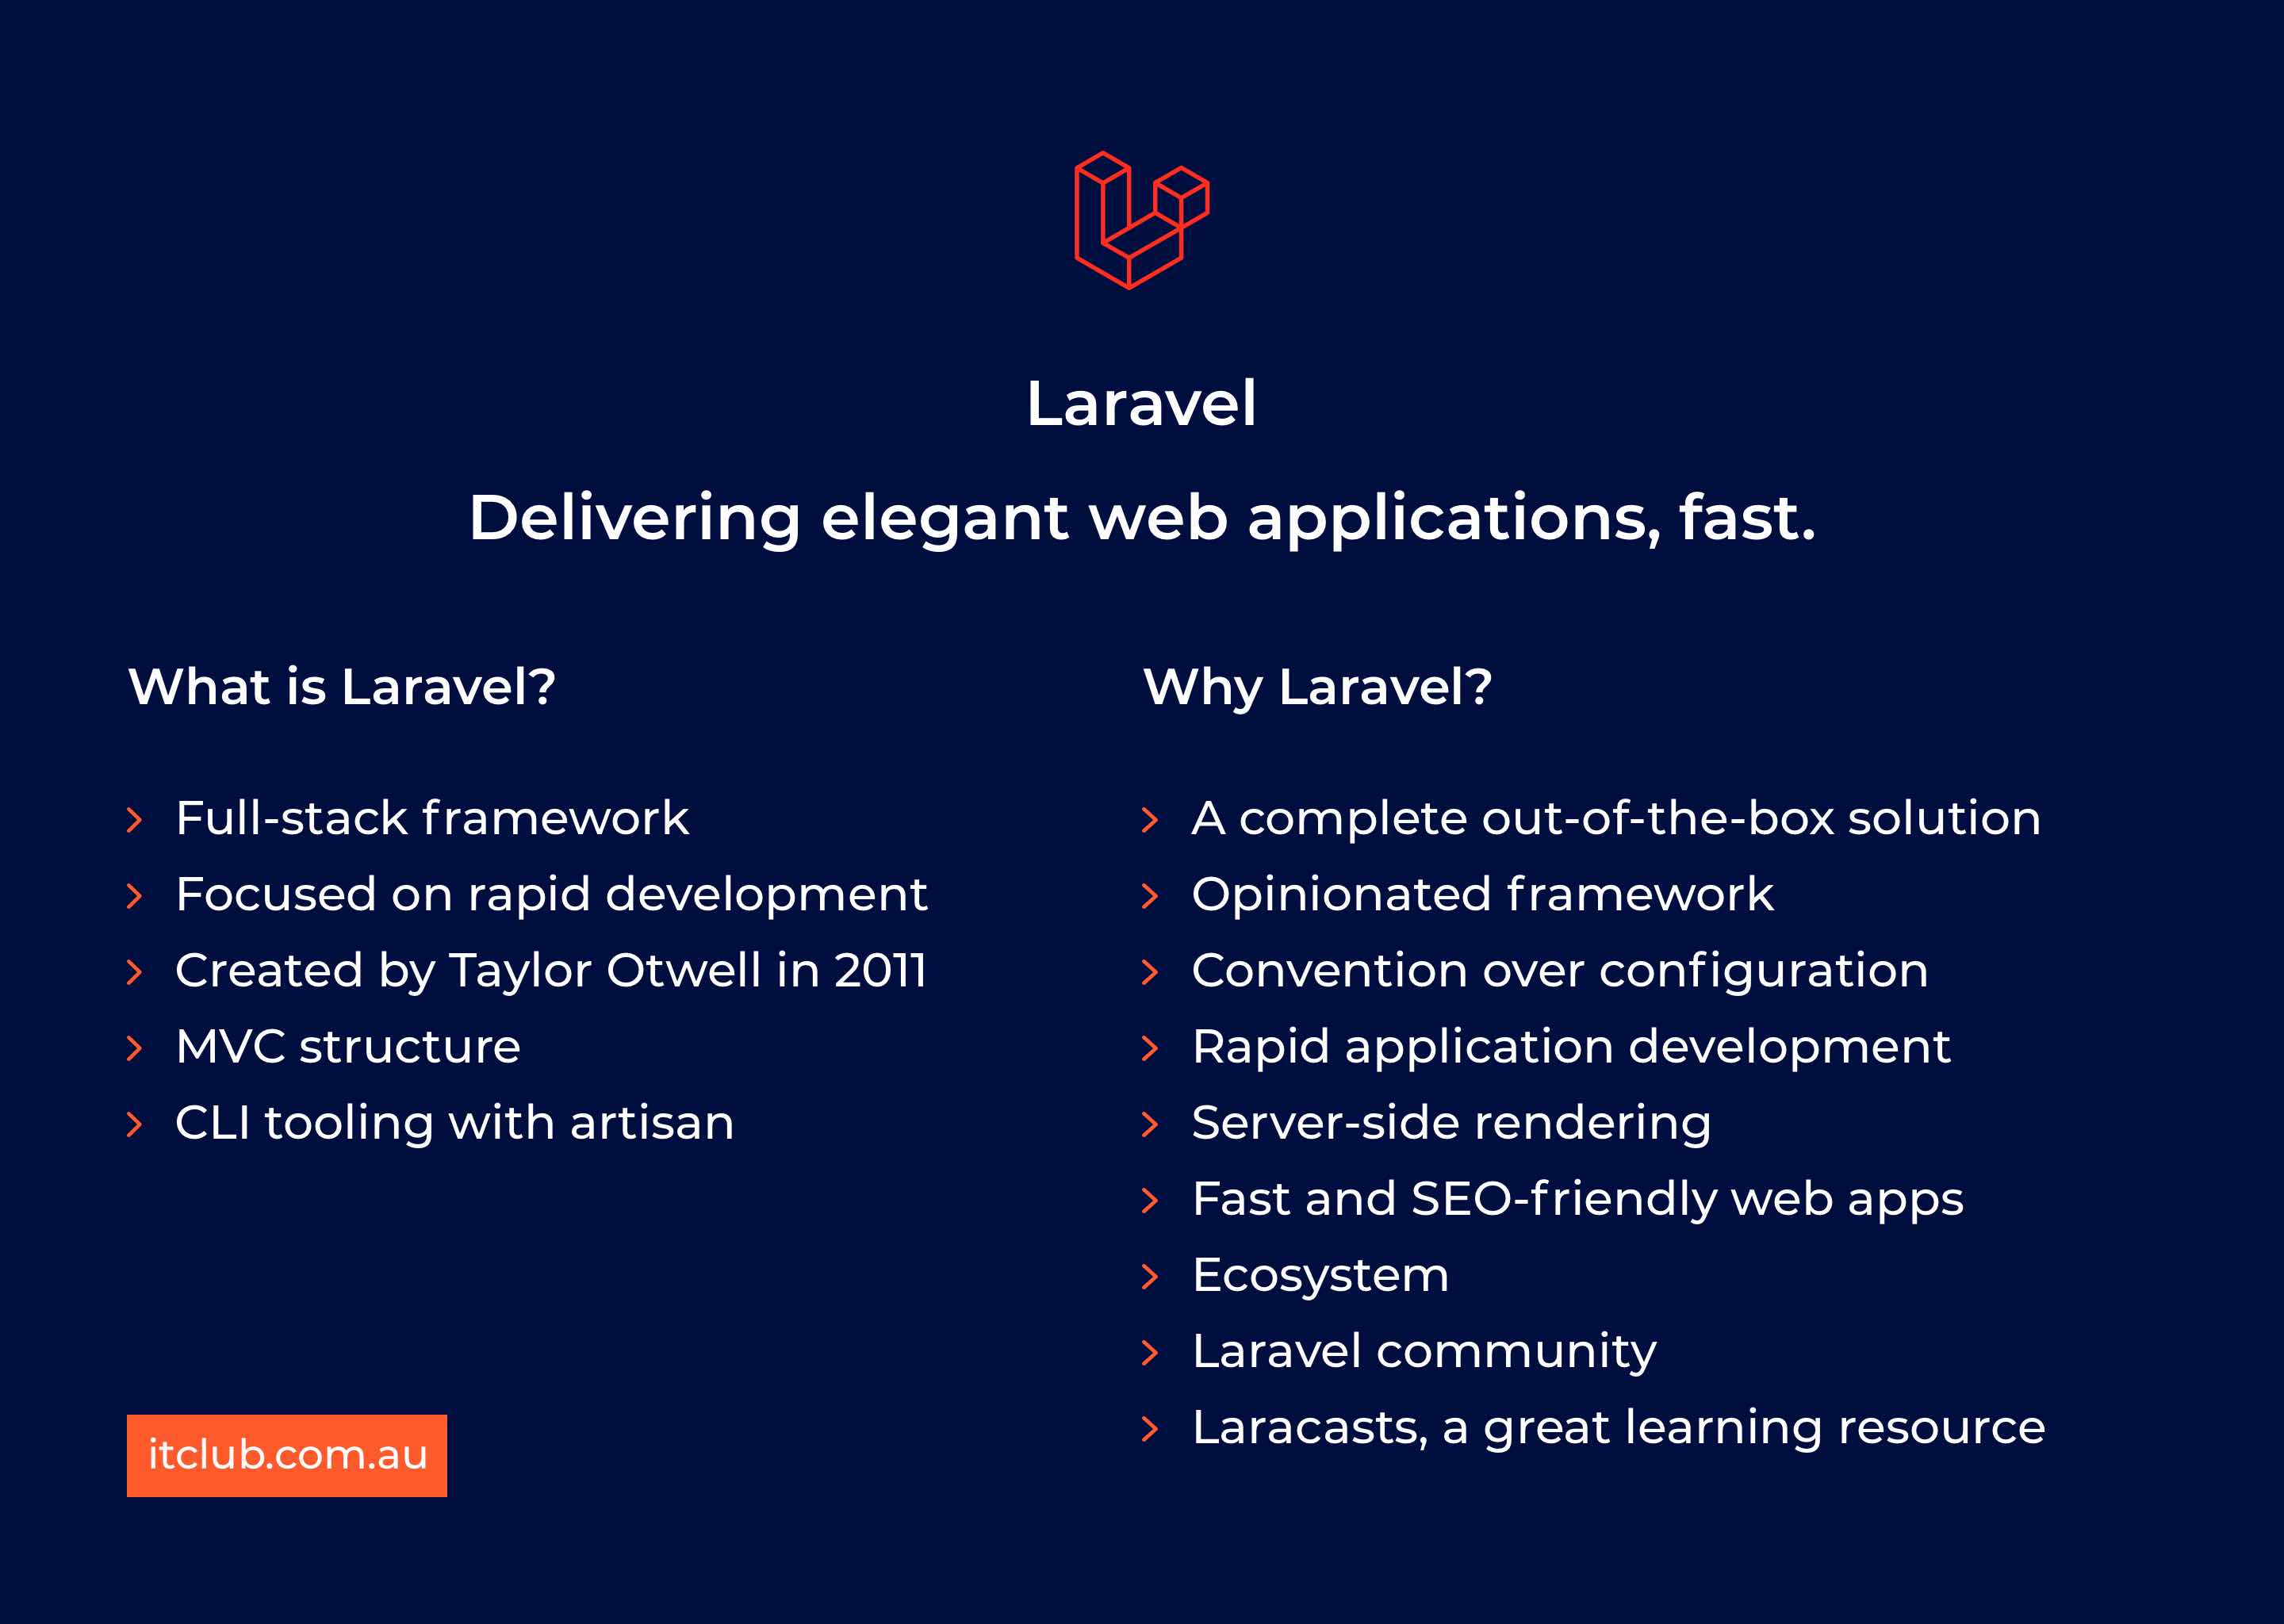 Laravel allows to develop elegant web applications fast. What is Laravel? Why Laravel?